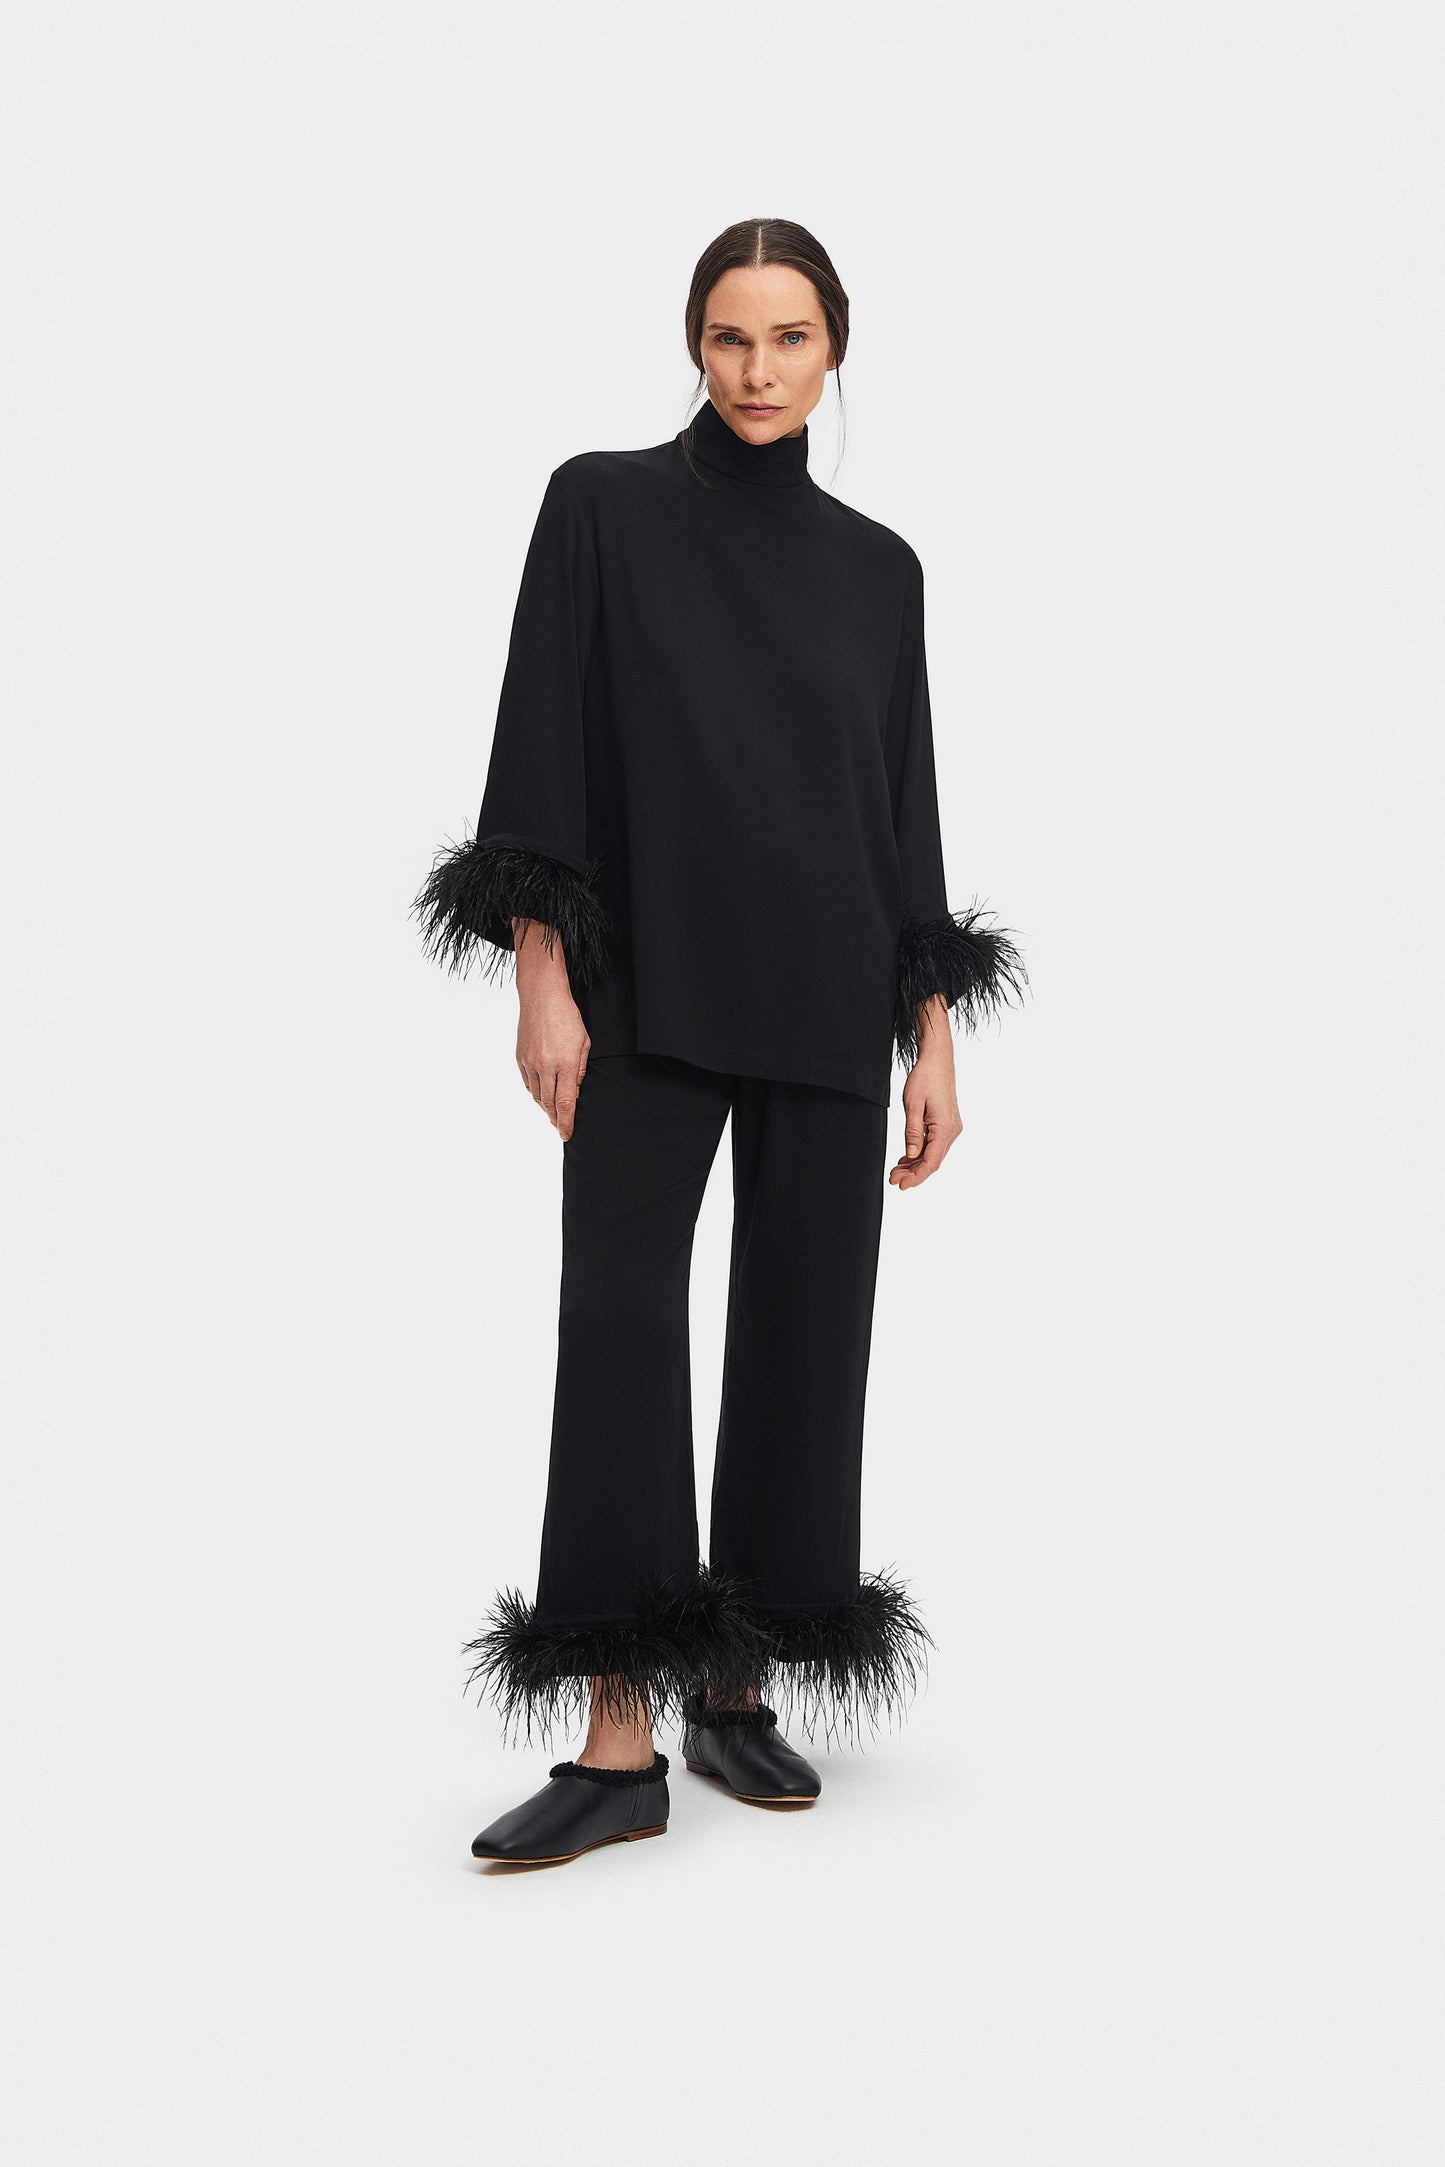 Black Tie Pajama with Detachable Feathers in Black